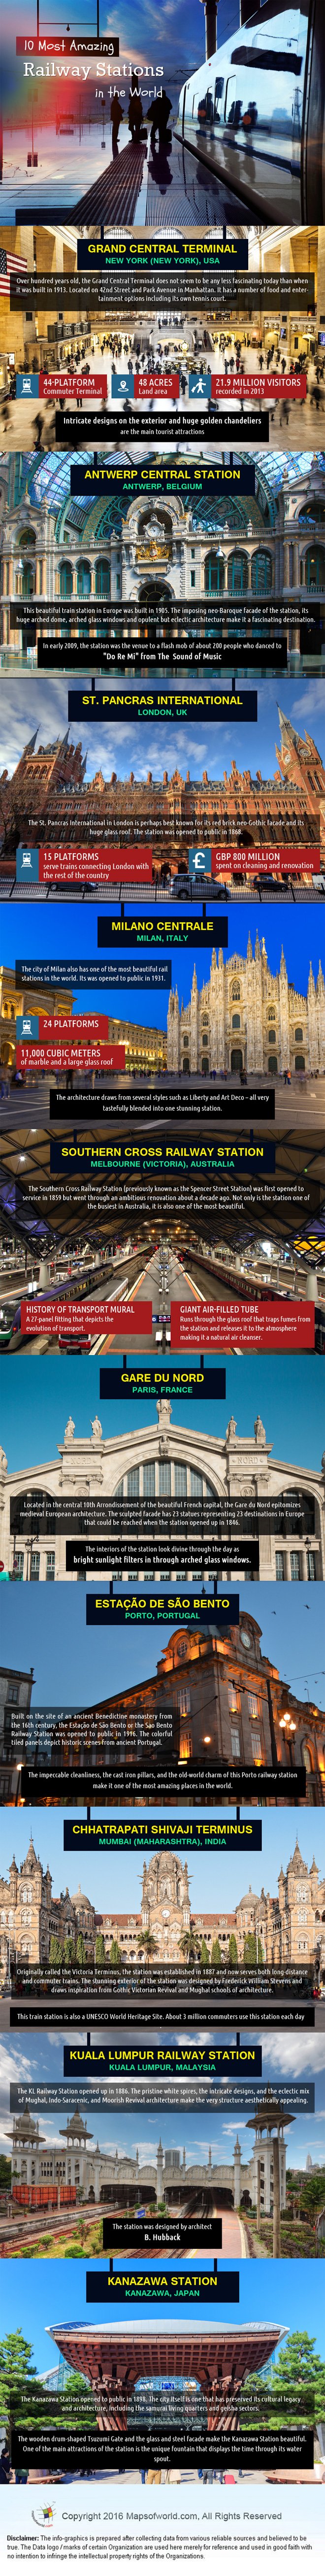 10-Most-Amazing-Railway-Stations-in-the-World-infographic